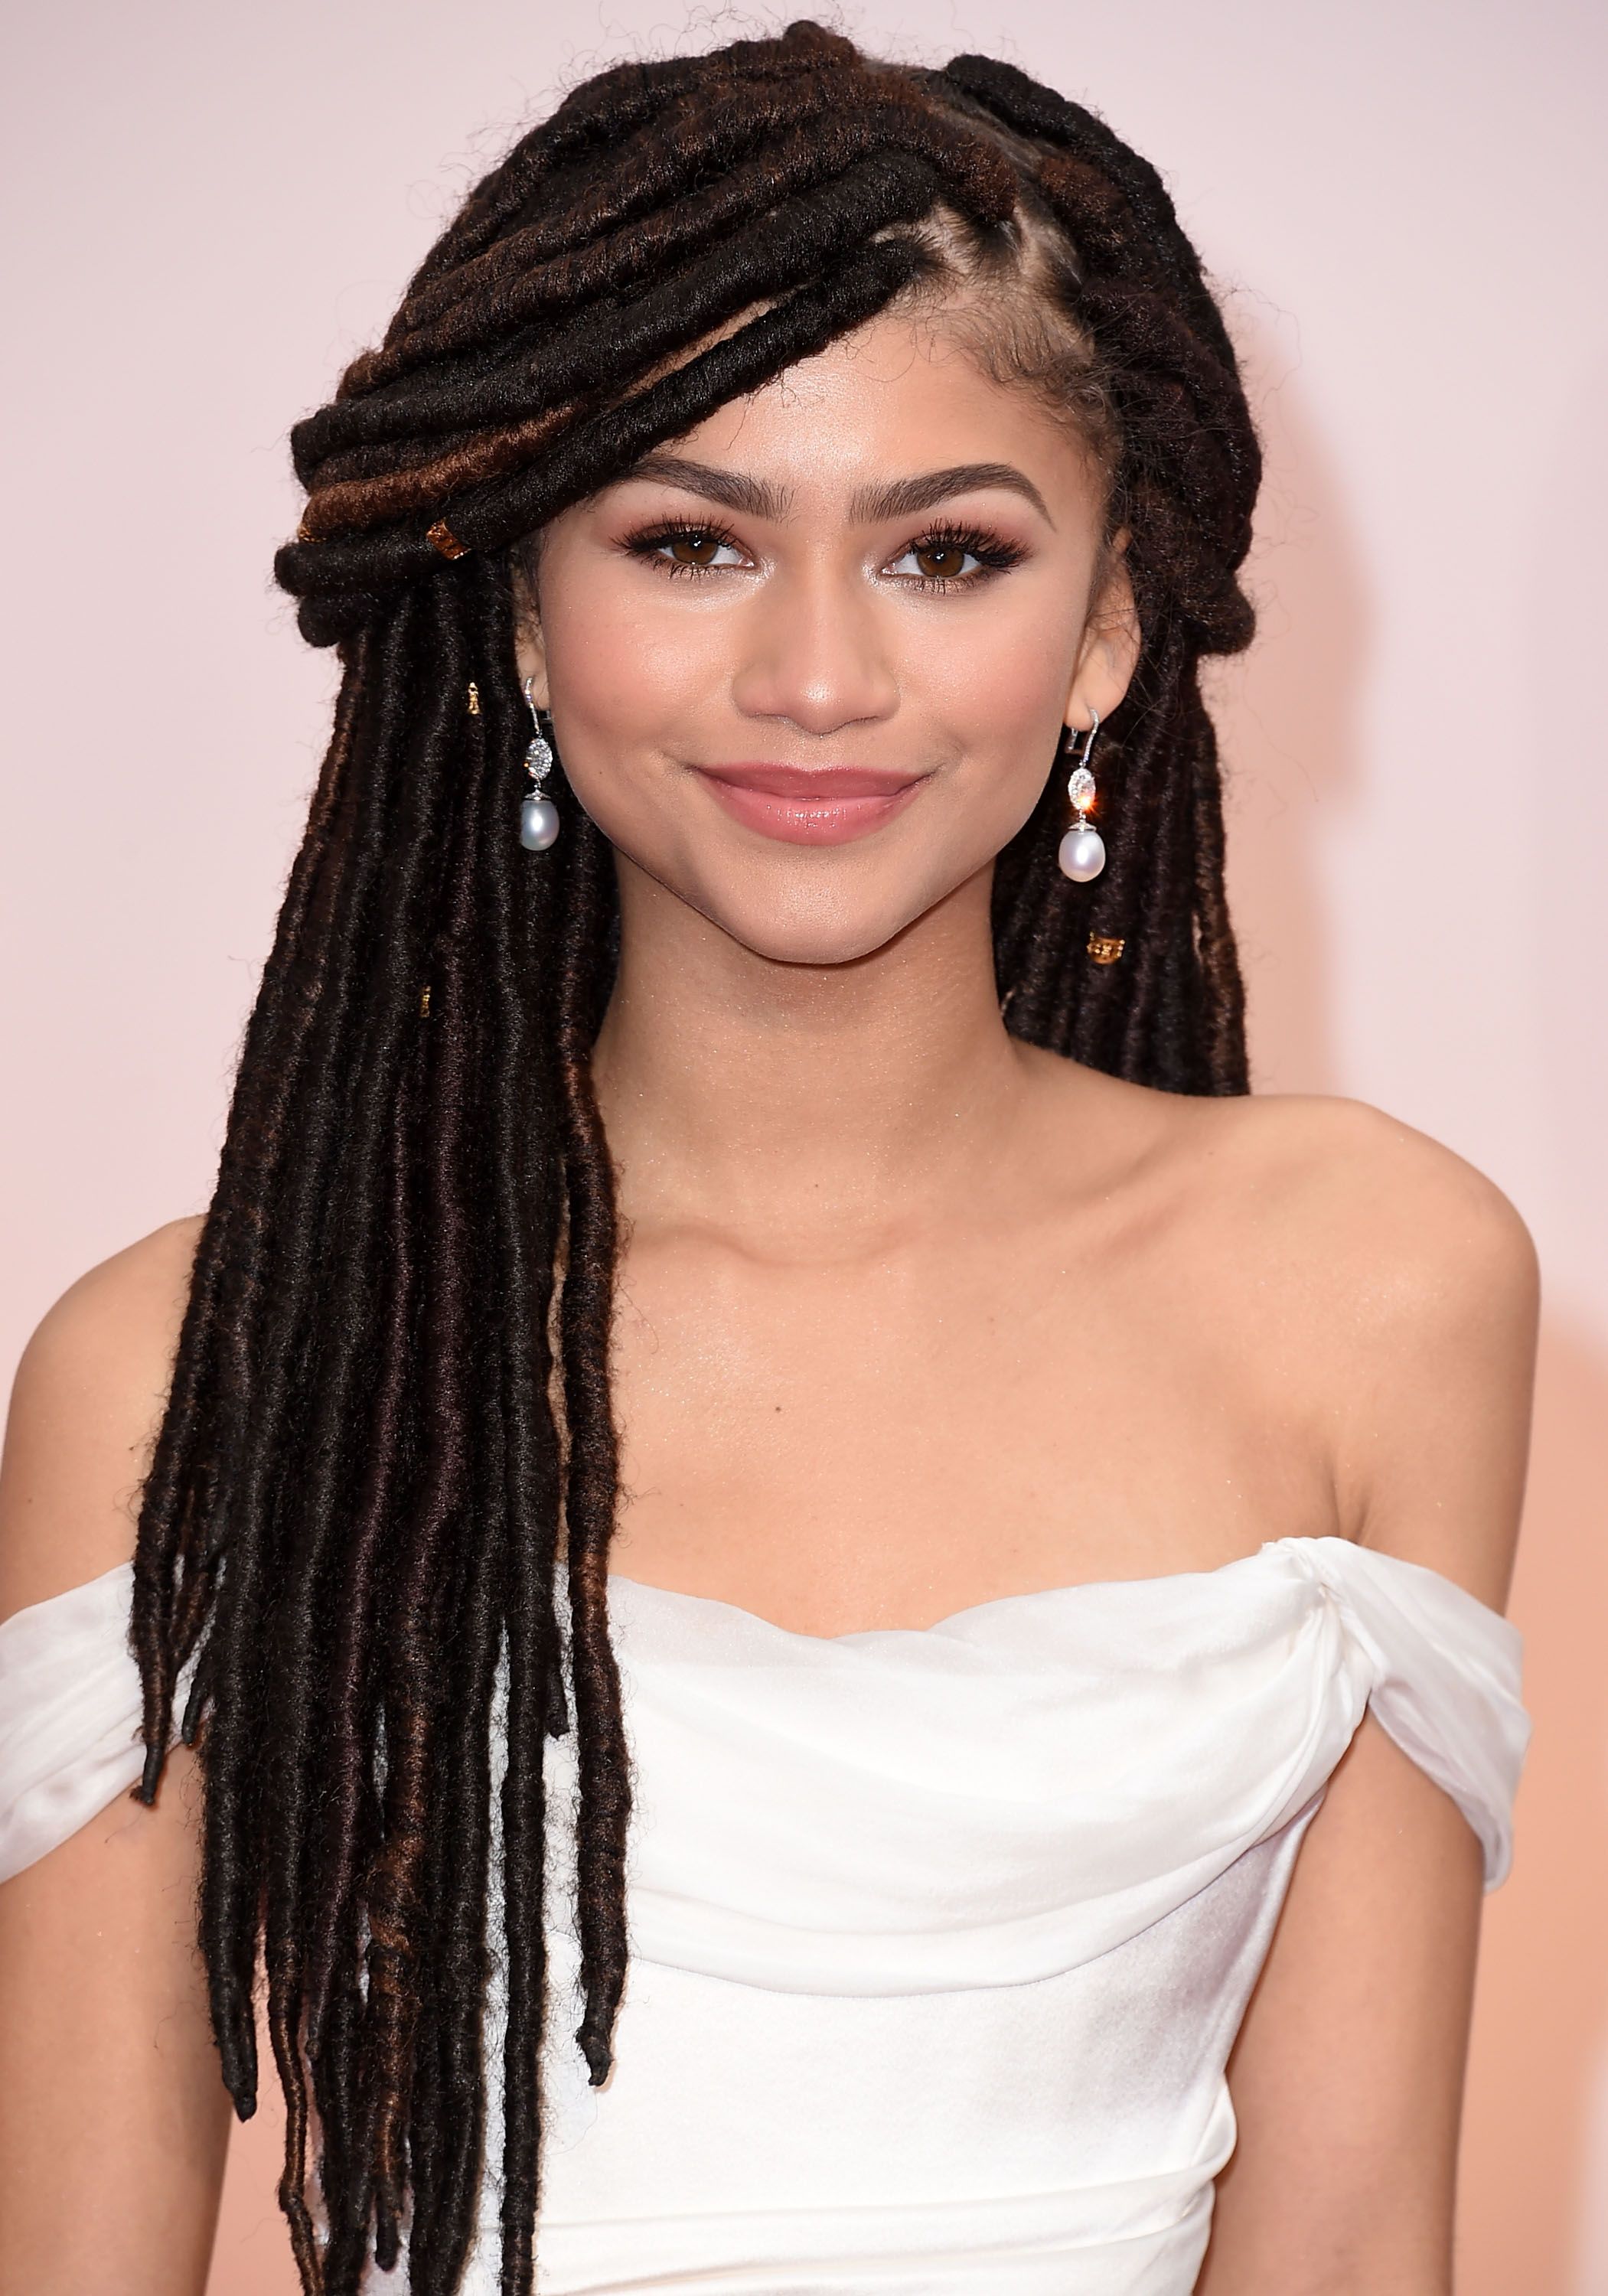 The 37 Best Red Carpet Hair and Makeup Moments - Best Red Carpet Beauty  Looks Ever